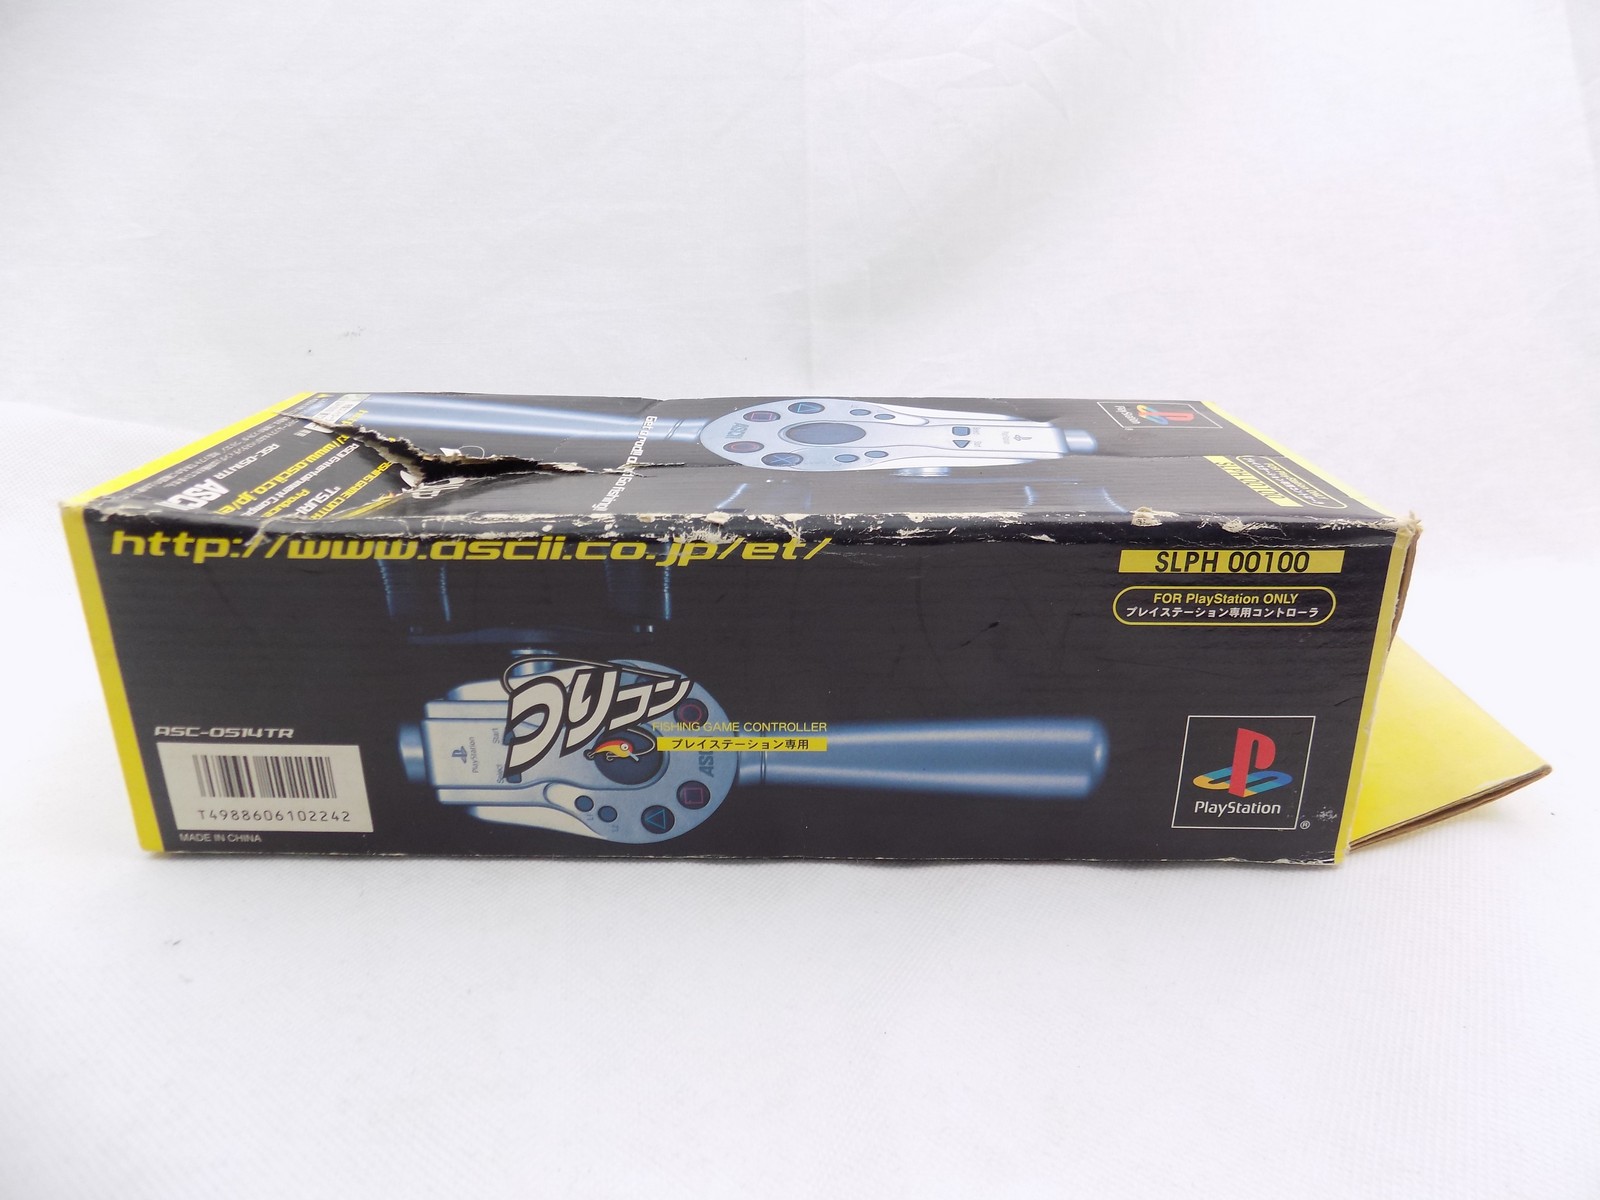 Boxed Playstation 1 Ps1 Ascii Fishing Rod Controller – Tested, Works! -  Starboard Games